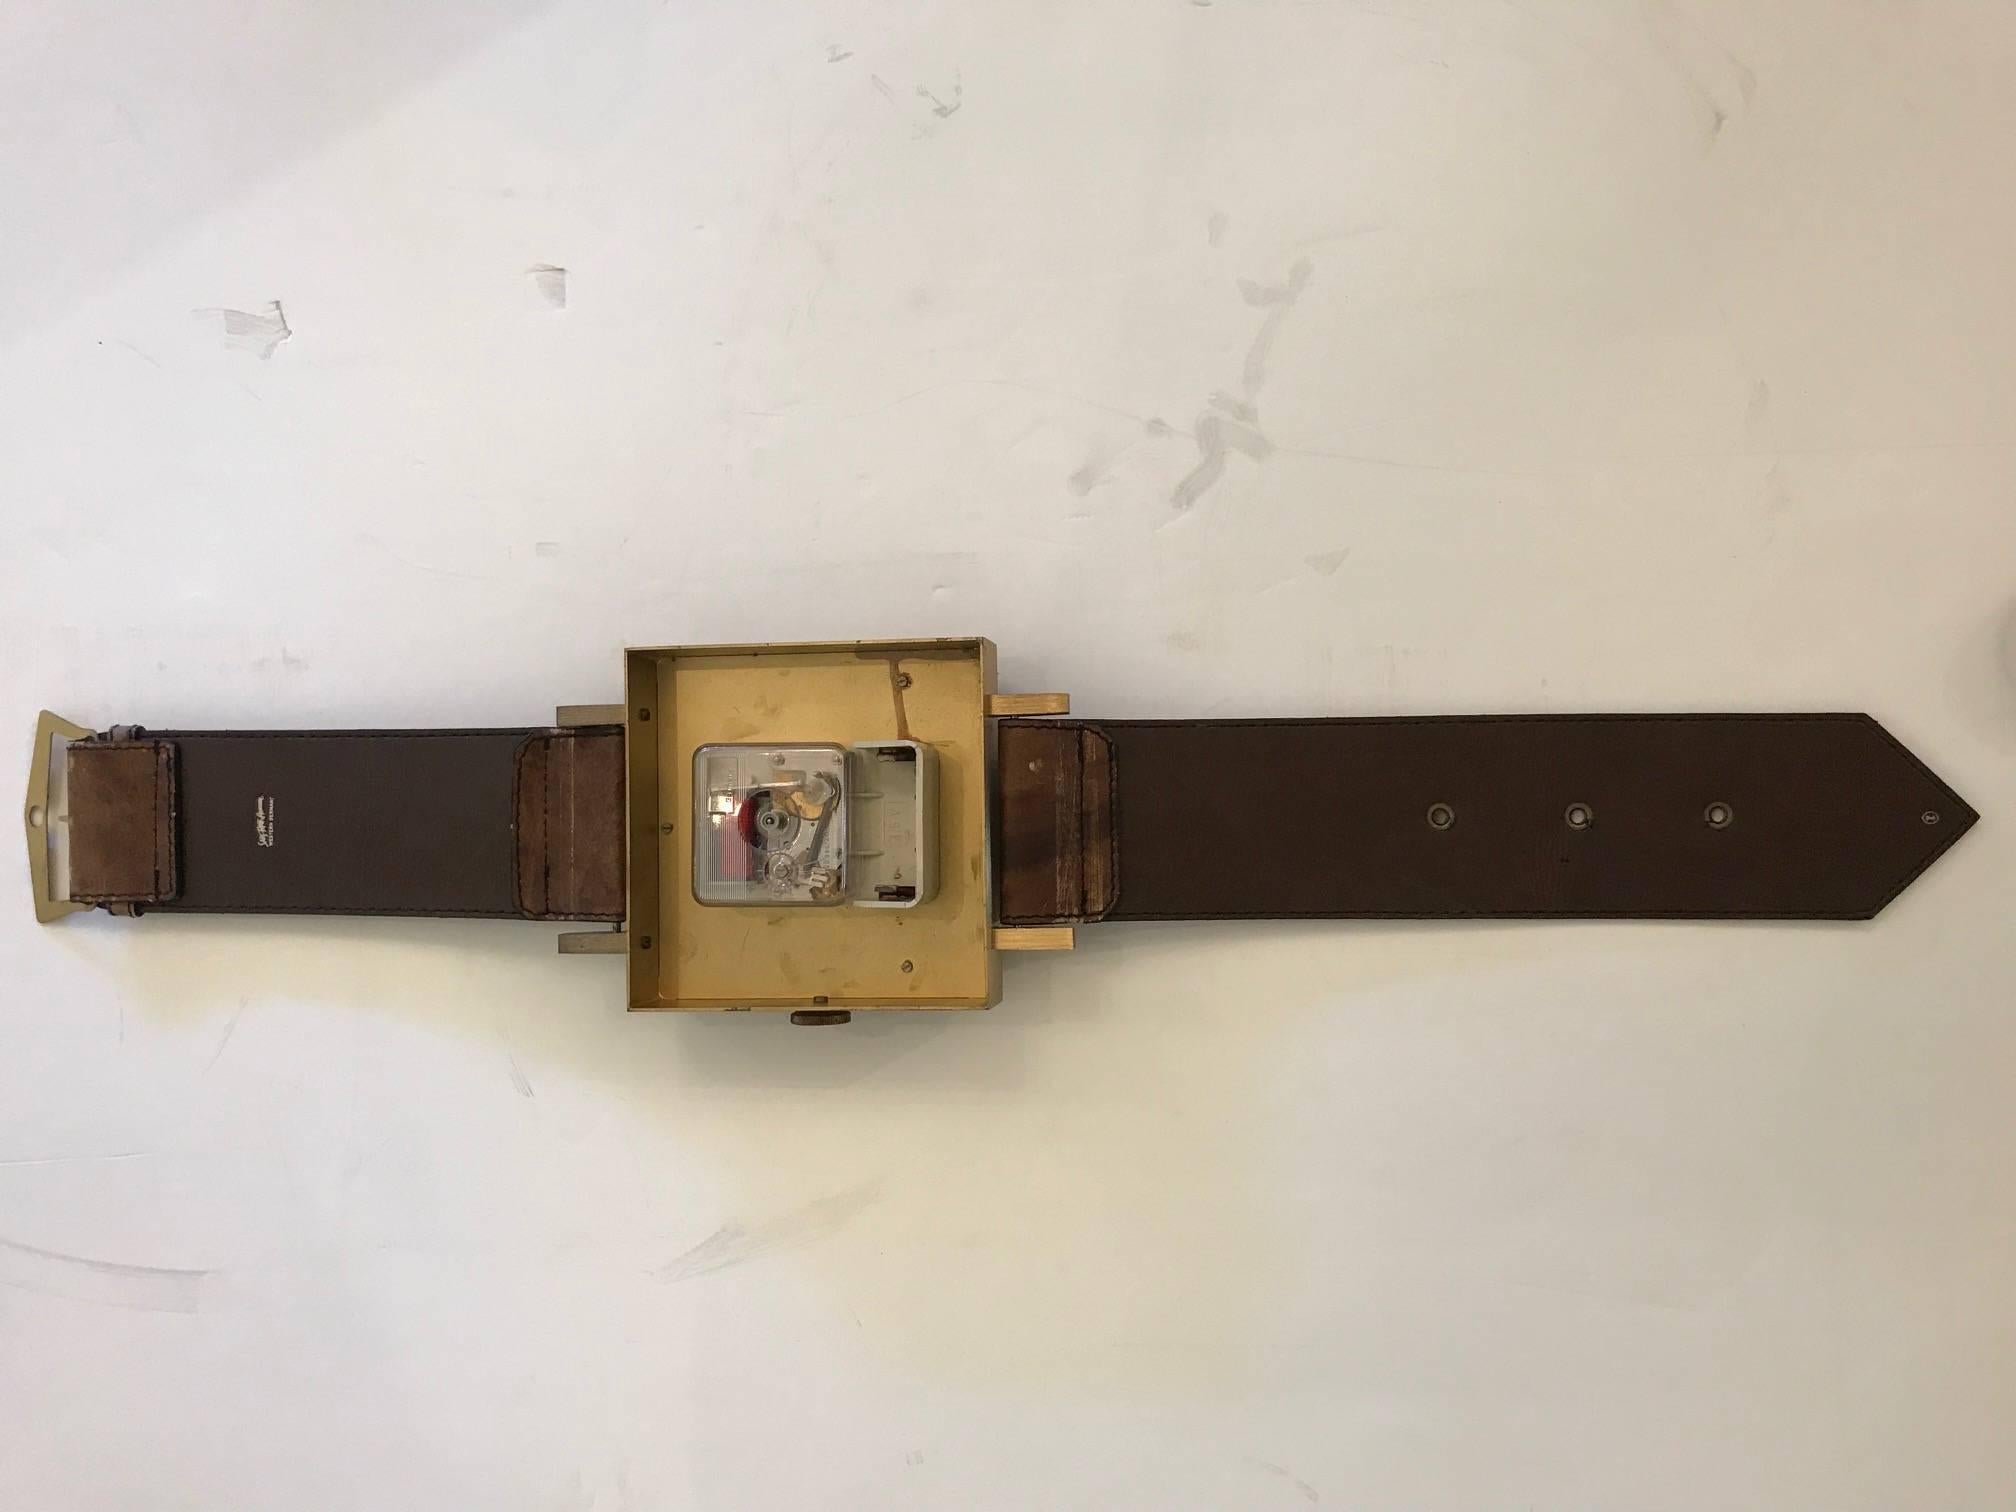 Late 20th Century Fun Giant Sized Wrist Watch Advertising Sign